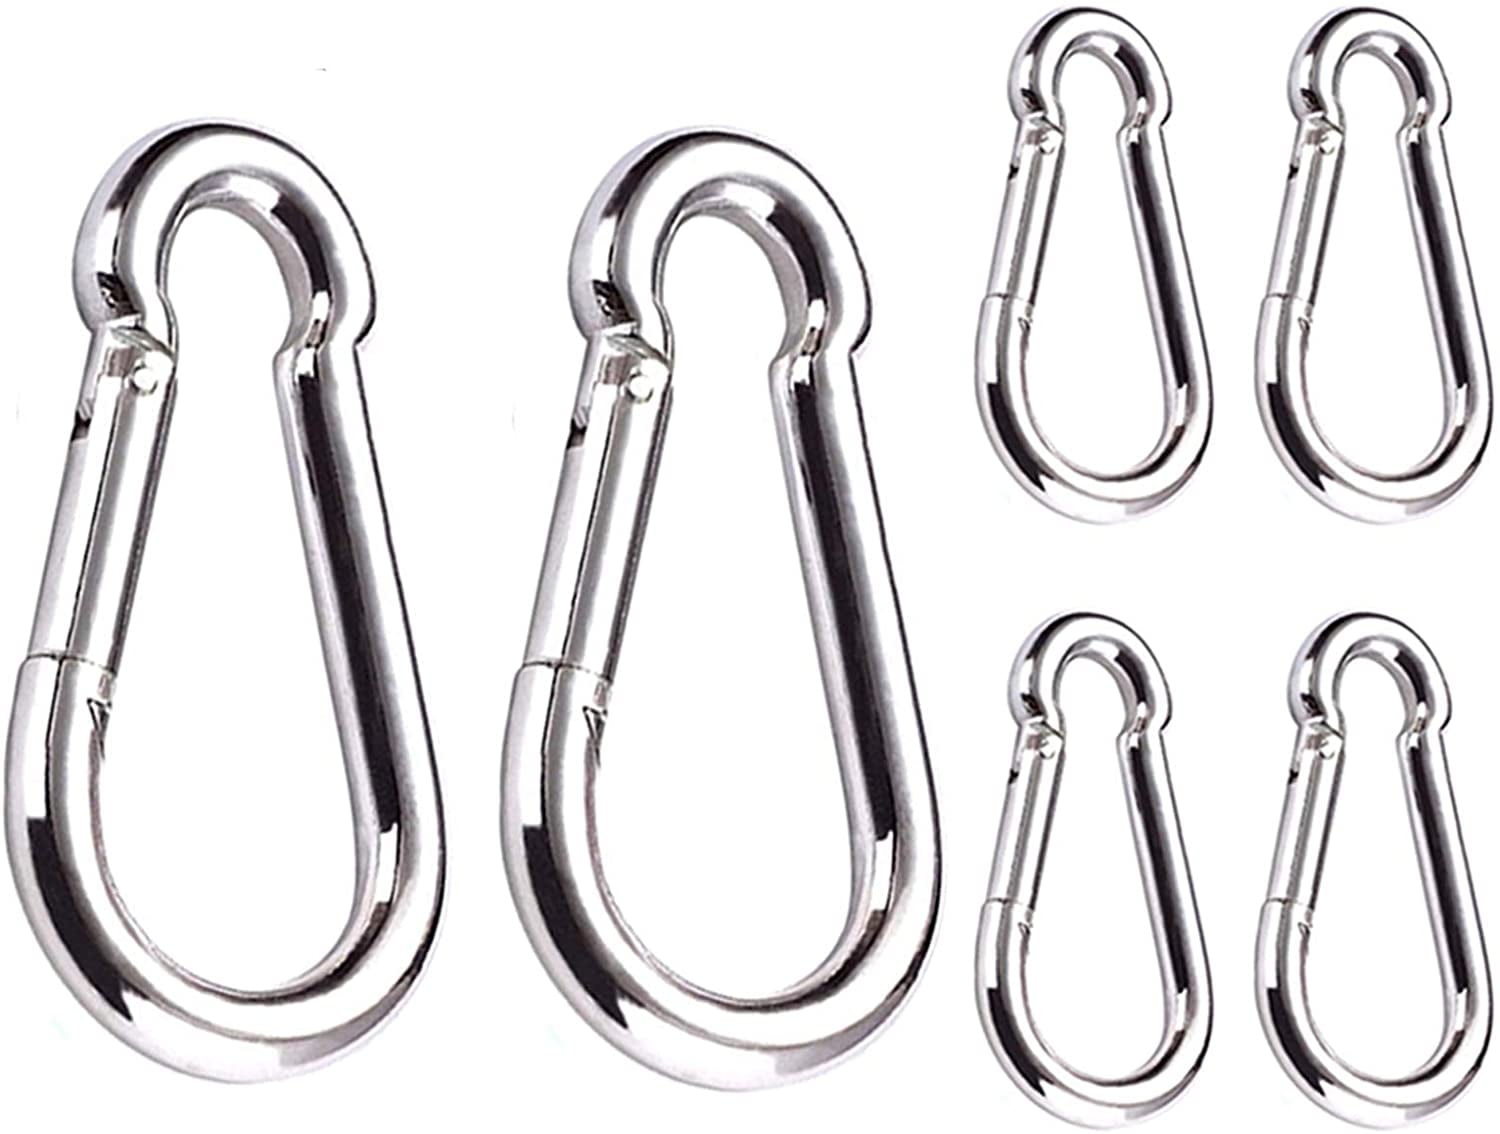 304 Stainless Steel Spring Snap Link for Swing 4 Inch 2 Inch Gym Crafts Hammock Dog Leash U/A Spring Snap Hook Carabiner Clips Heavy Duty Small & Large Kayaking 6 Packs